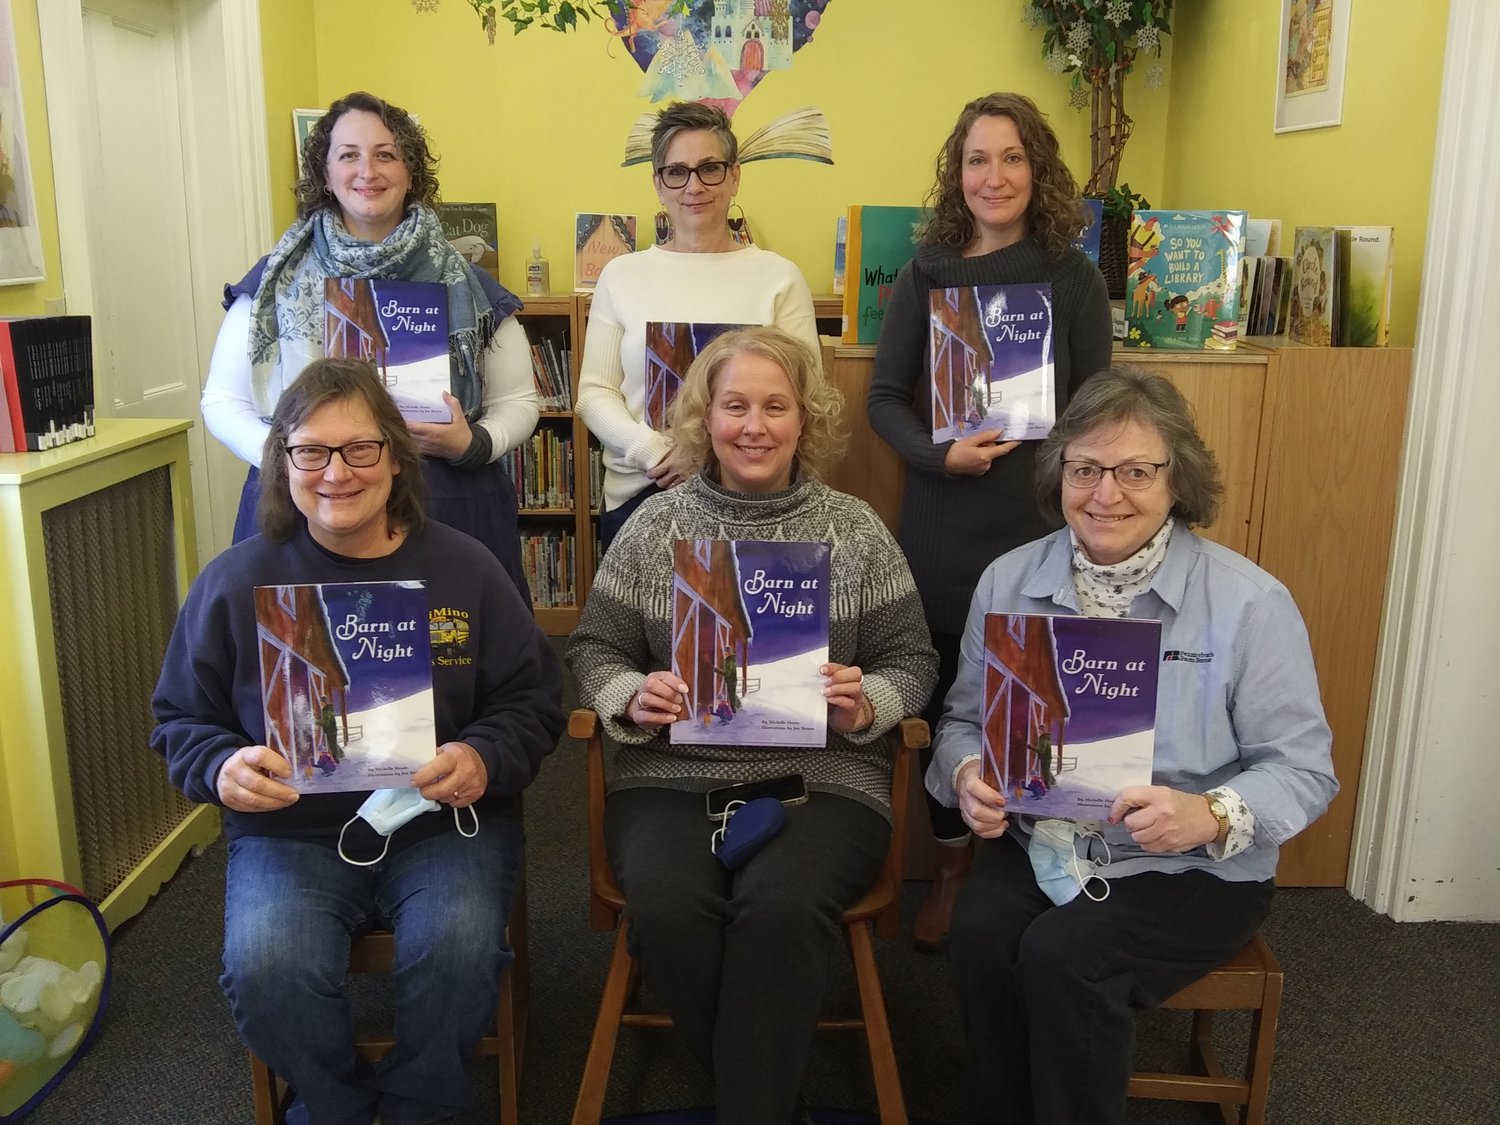 Staff from the Wayne/Pike Farm Bureau and from area libraries pose with copies of “Barn at Night.” Pictured, standing. are Jenny Snyder, left, Betty Lawson, and Allison Mowatt. Seated are Joyce Carson, left, Tracy Schwarz and Bonnie LaTourette. Not pictured are Kate Baxter, Kristina Russo, Amy Keane and Lynn Scramuzza...